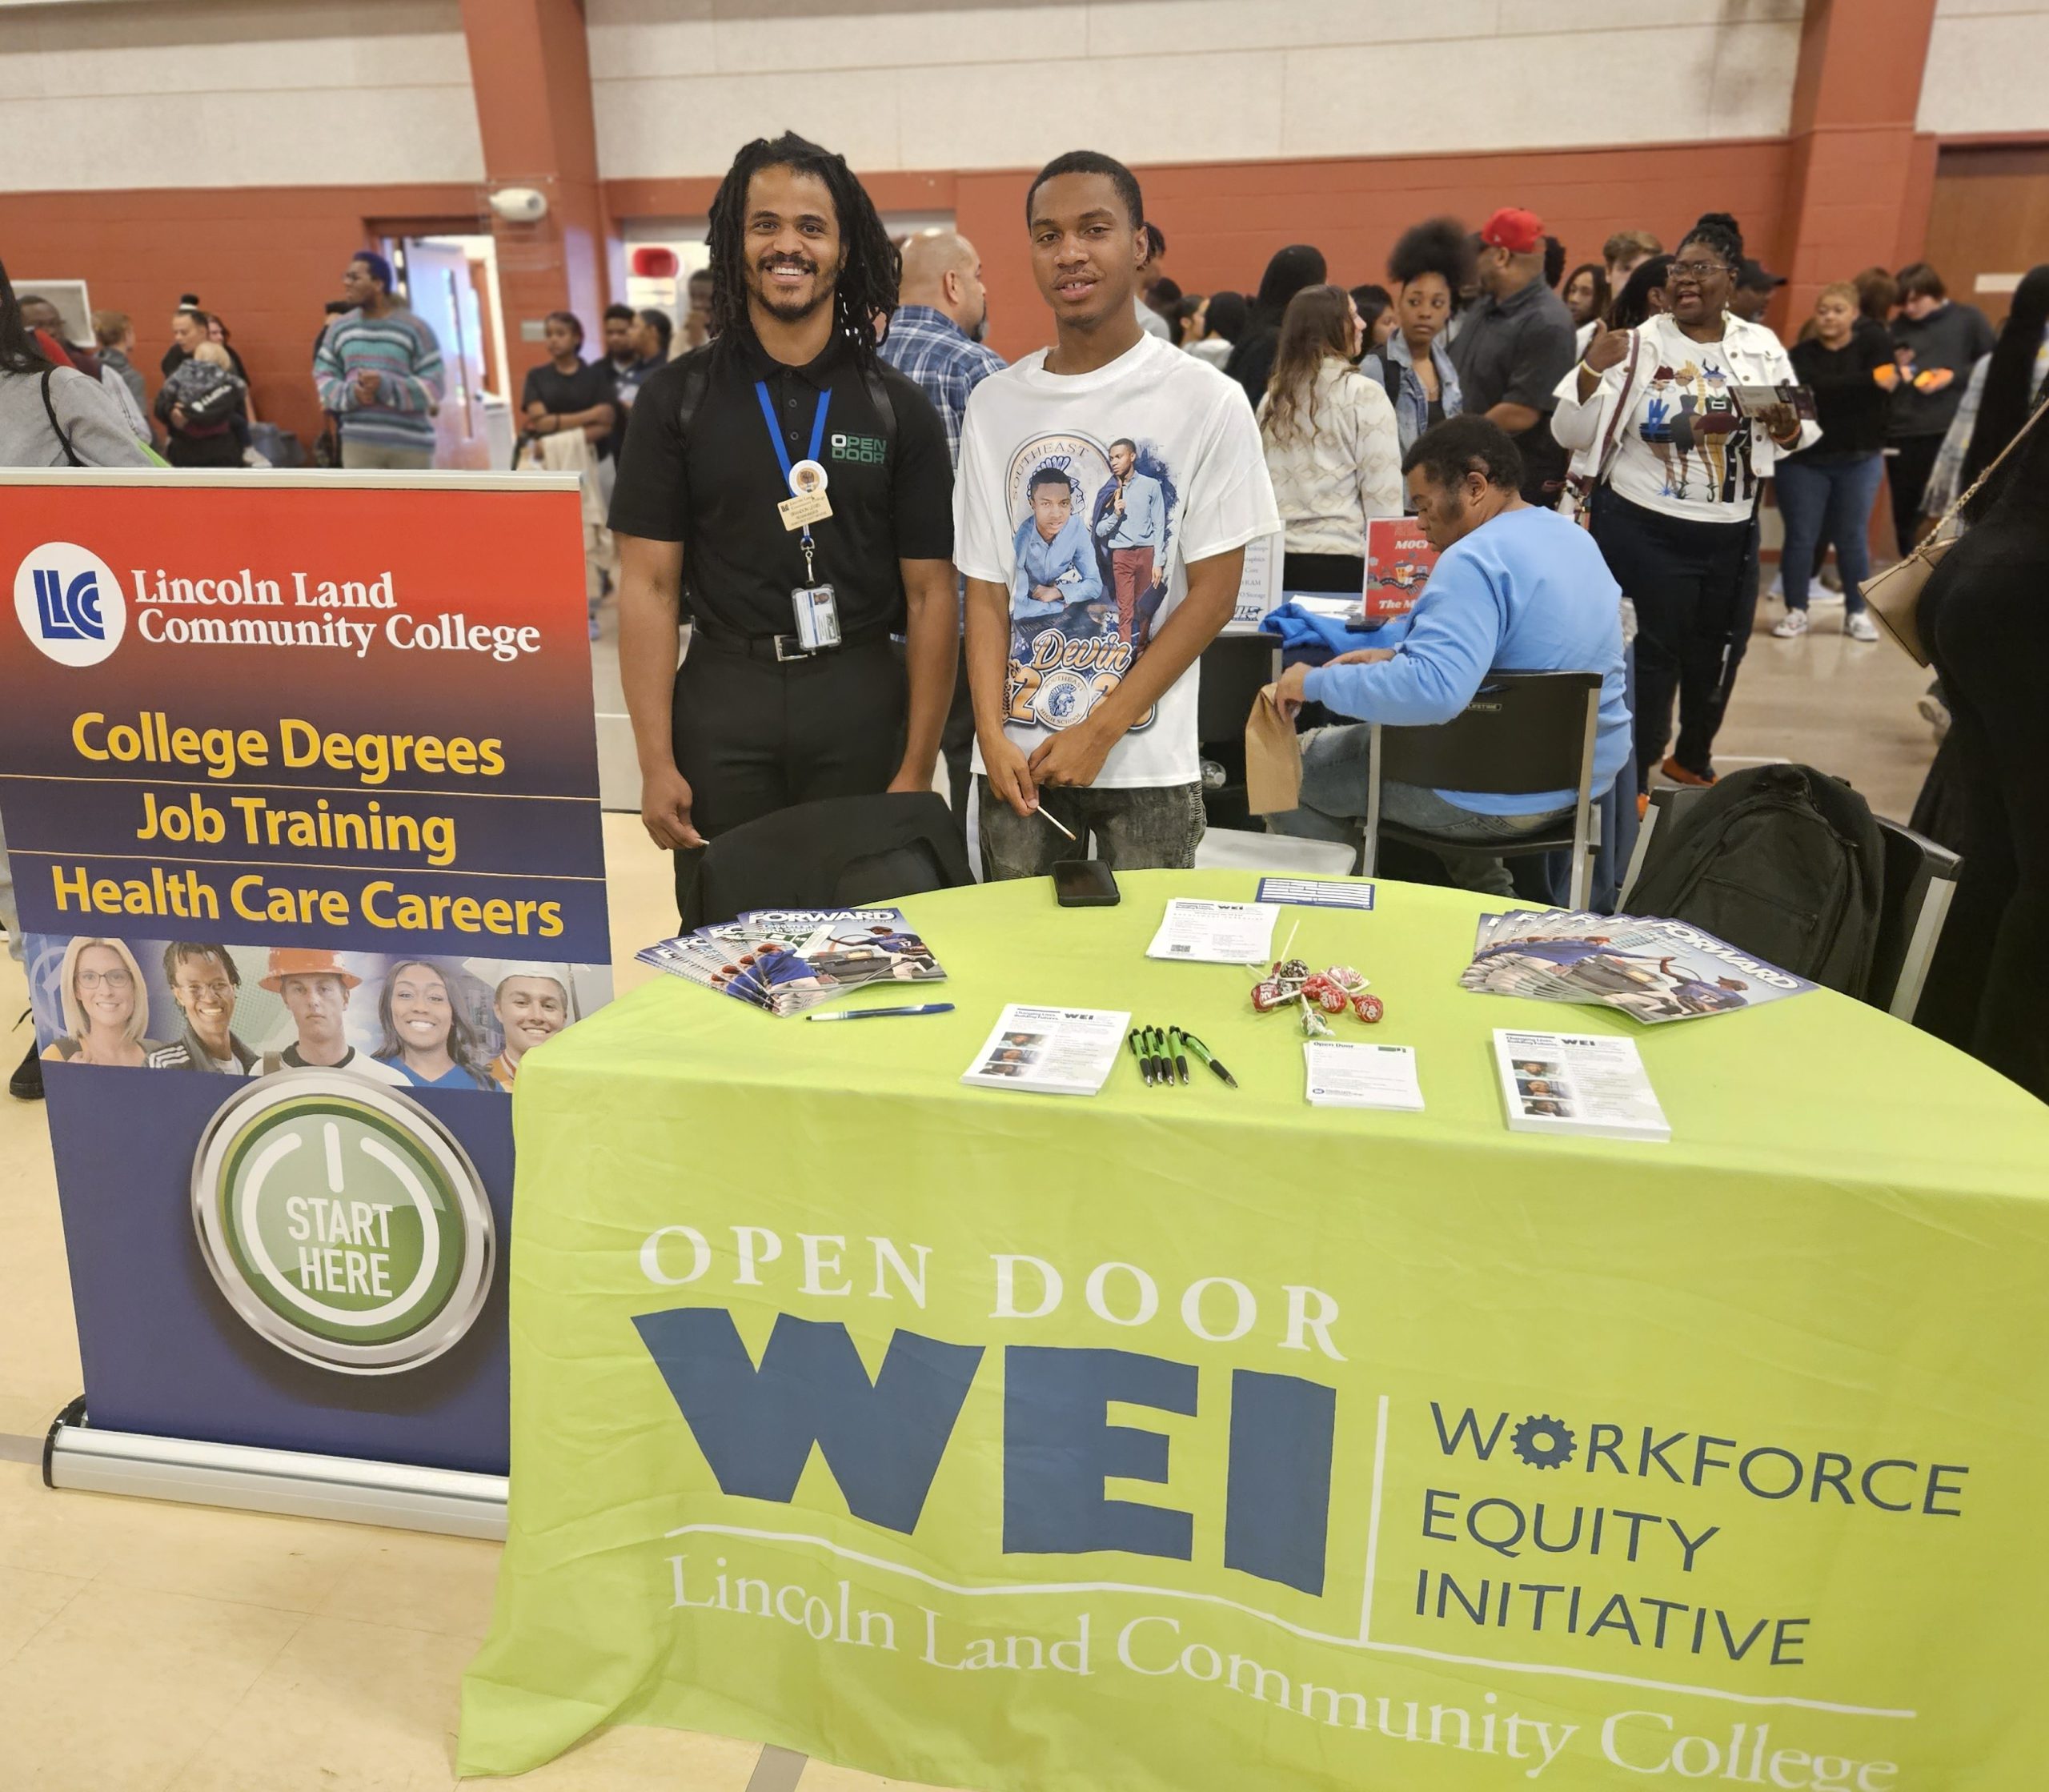 Brandon Lewis with a student at the WEI table